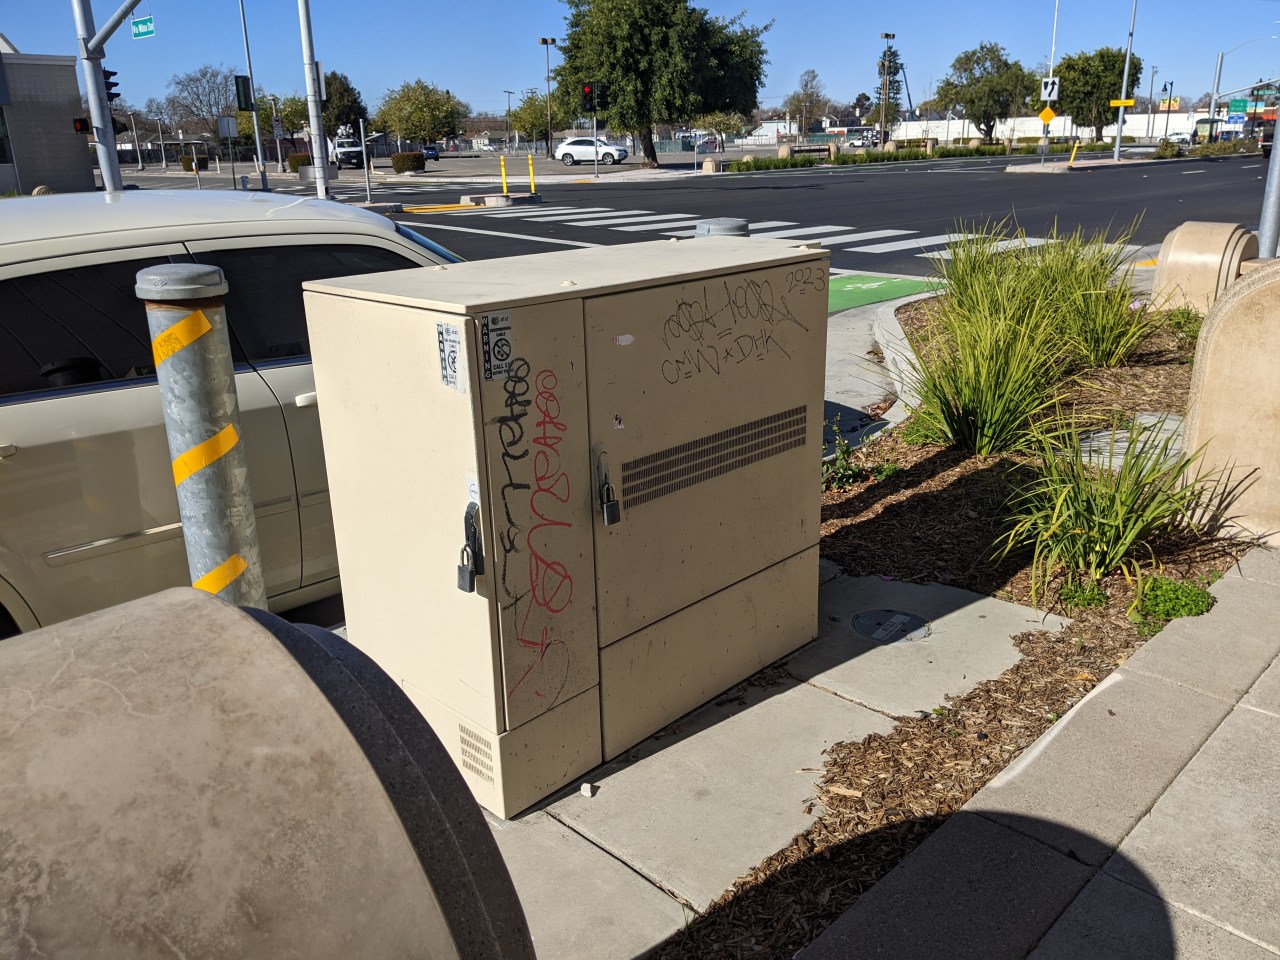 Note the heavy steel post to the right of this utility box--protect a utility box but not people? Very Alameda County